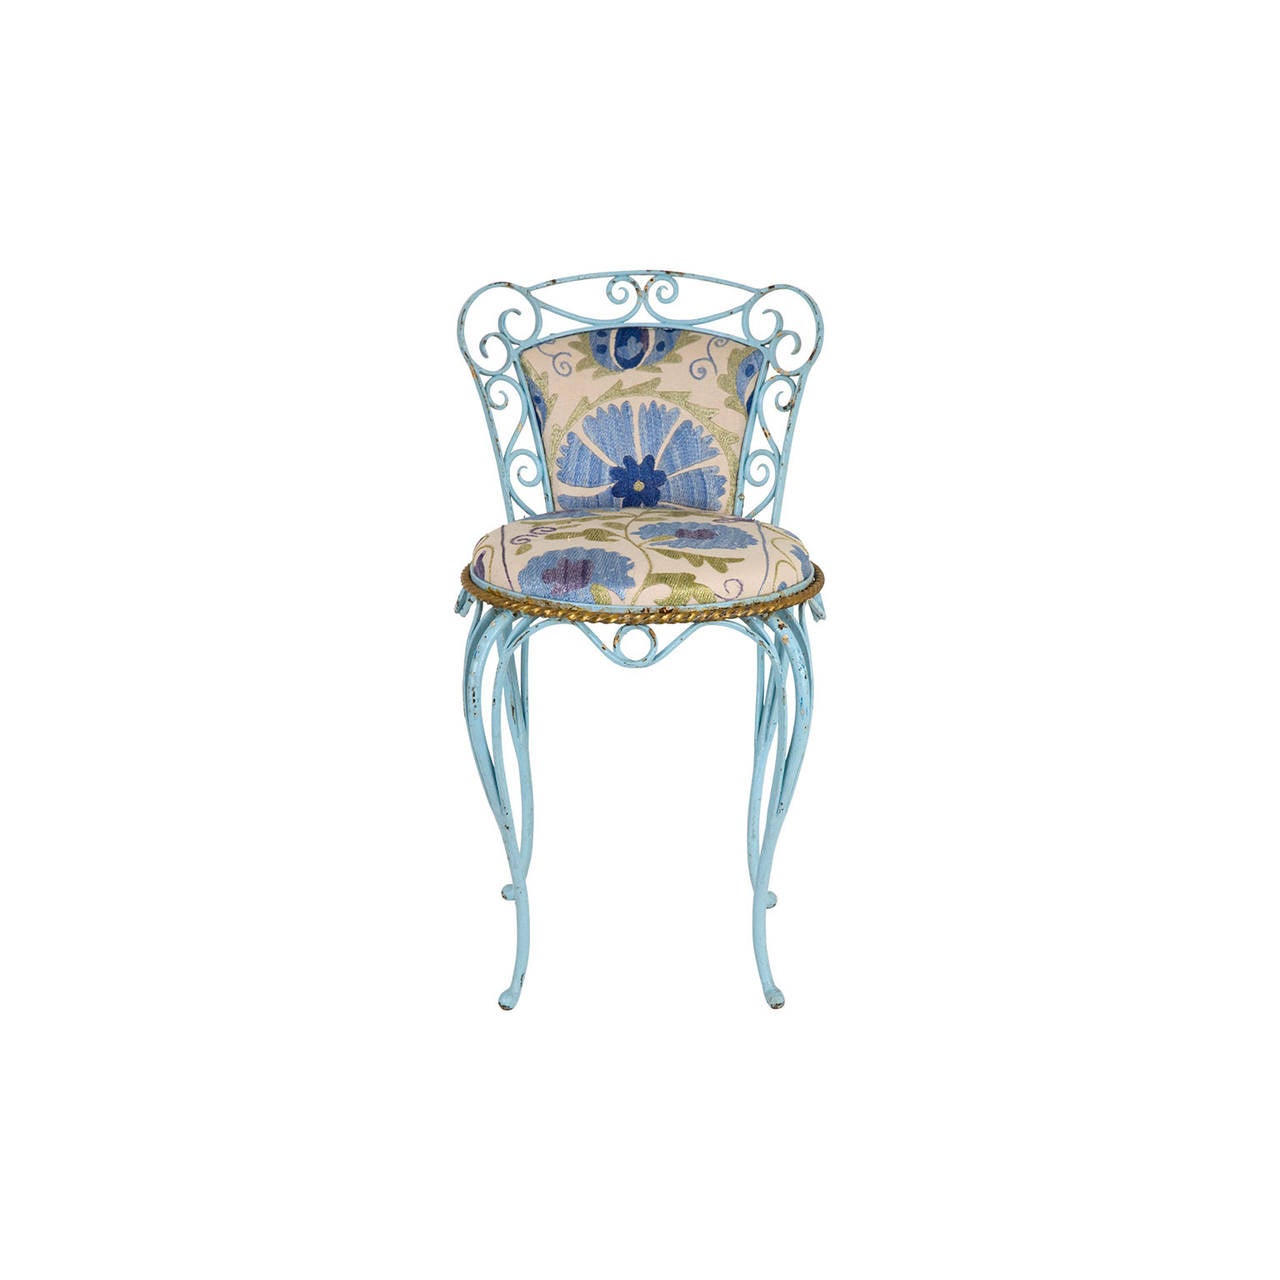 French Vintage Painted Iron Garden Chair